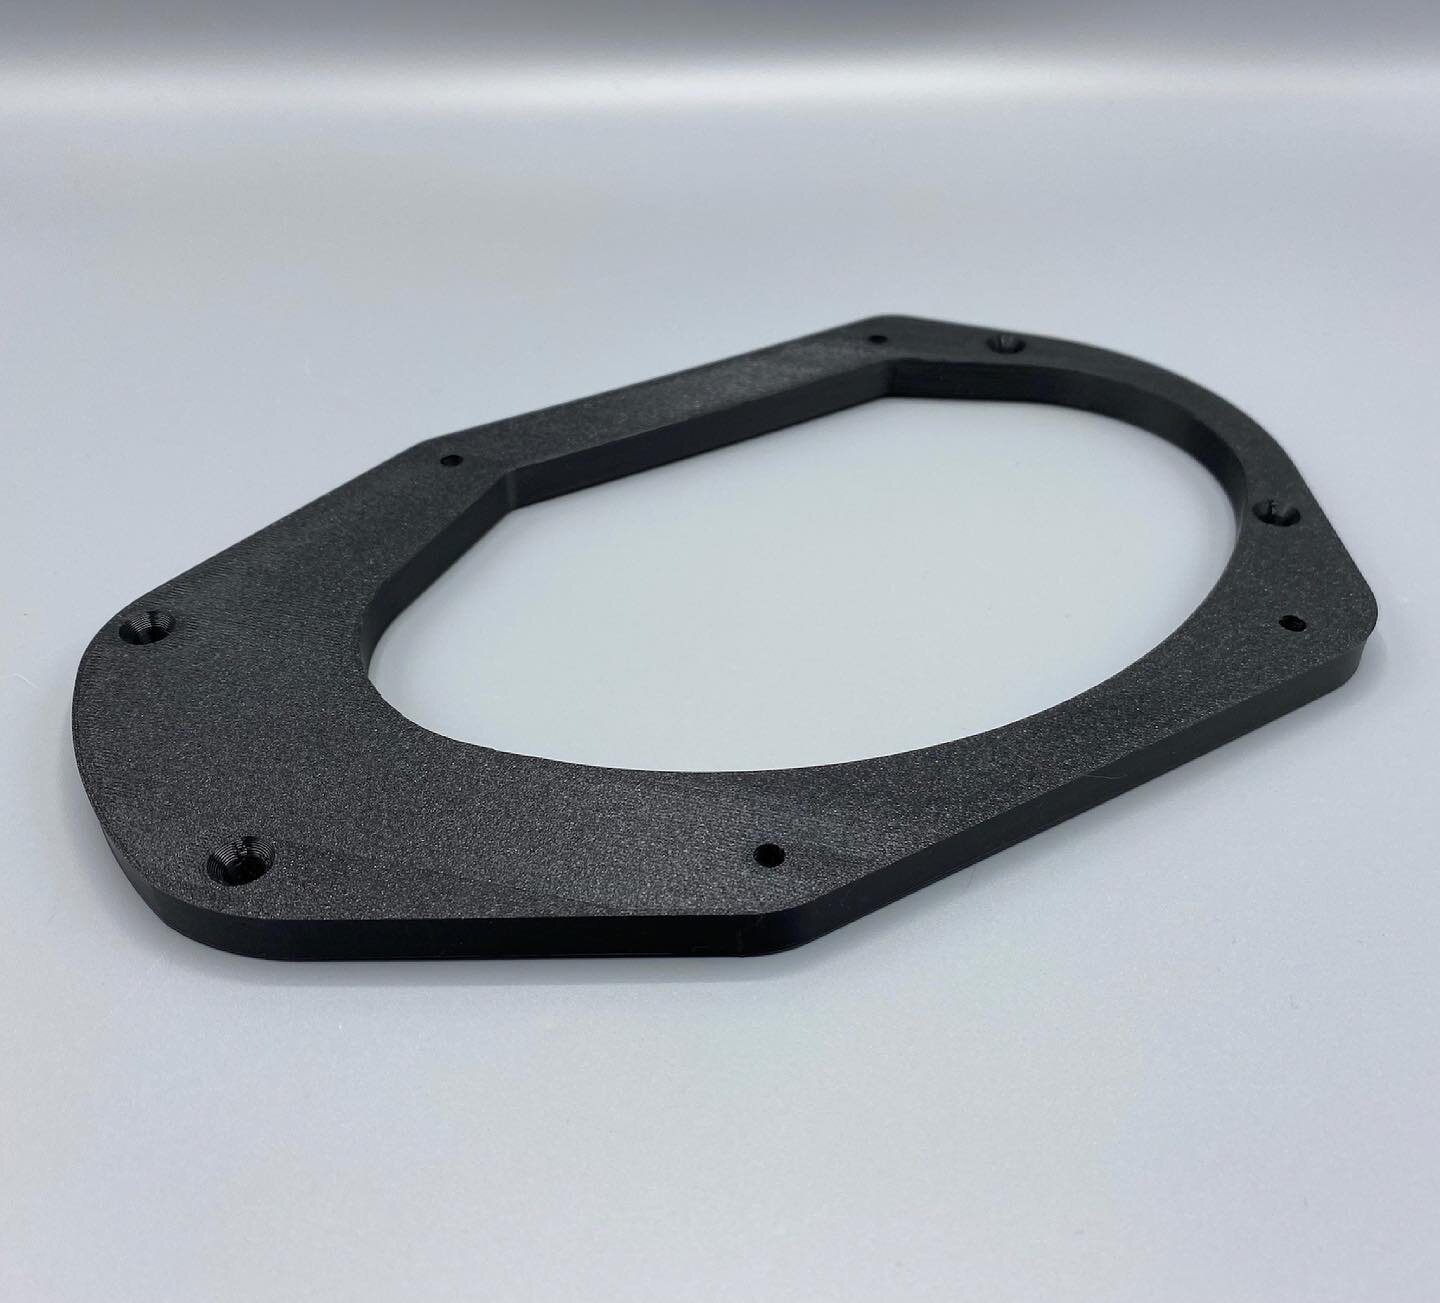 Do you dislike drilling holes or cutting up original parts as much as we do? Something as simple as mounting speakers can become a serious challenge on our old cars. With thoughtful design and 3D printing, Next Gen Designs can help bring your ride in